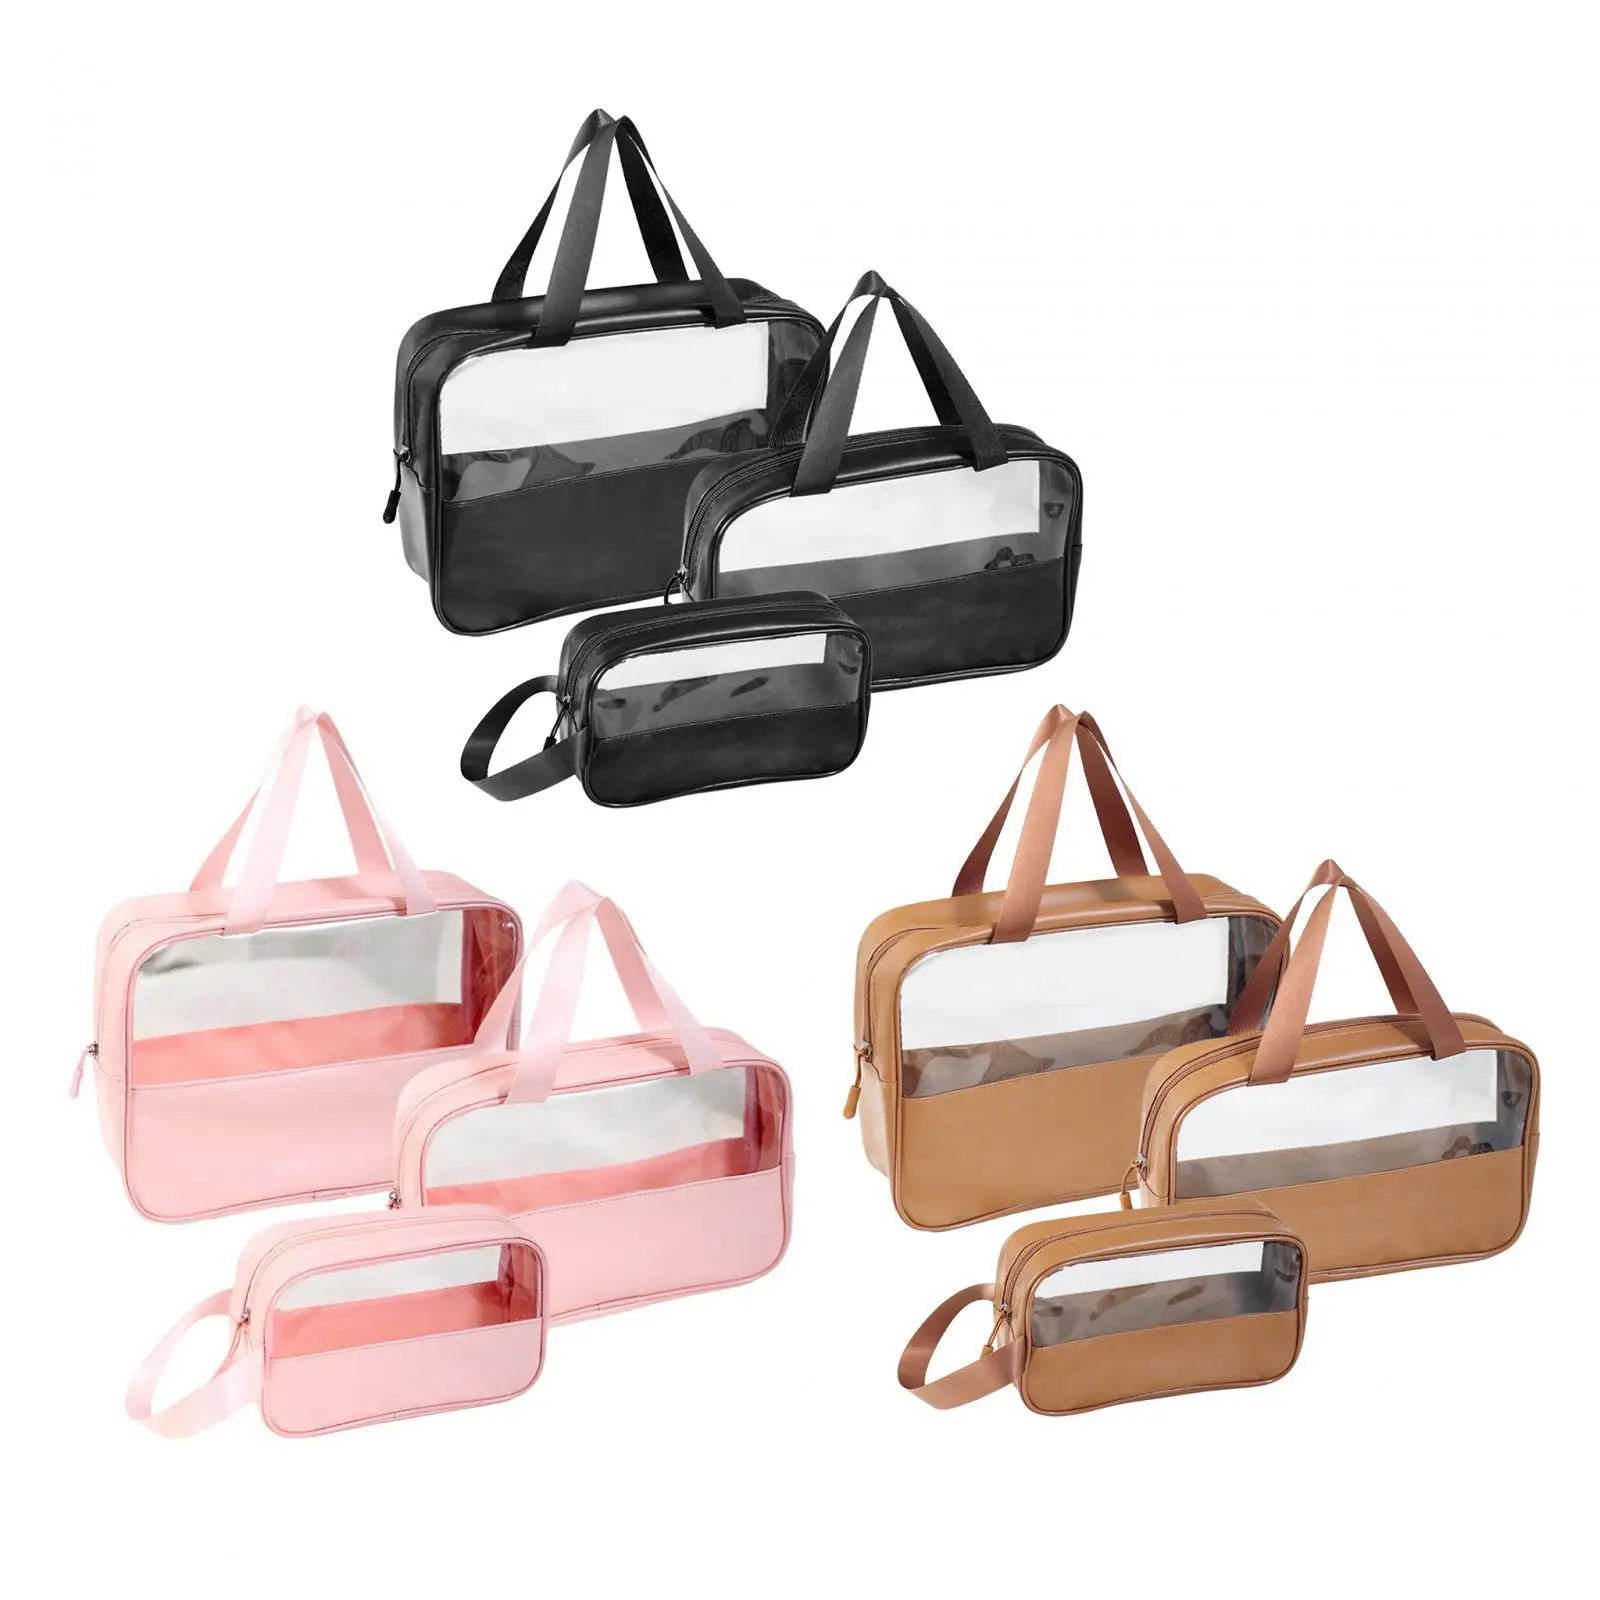 3x Women Makeup Bag Travel Cosmetic Bag Make up Organizer Cosmetic Case Toiletry Bag for Outdoor